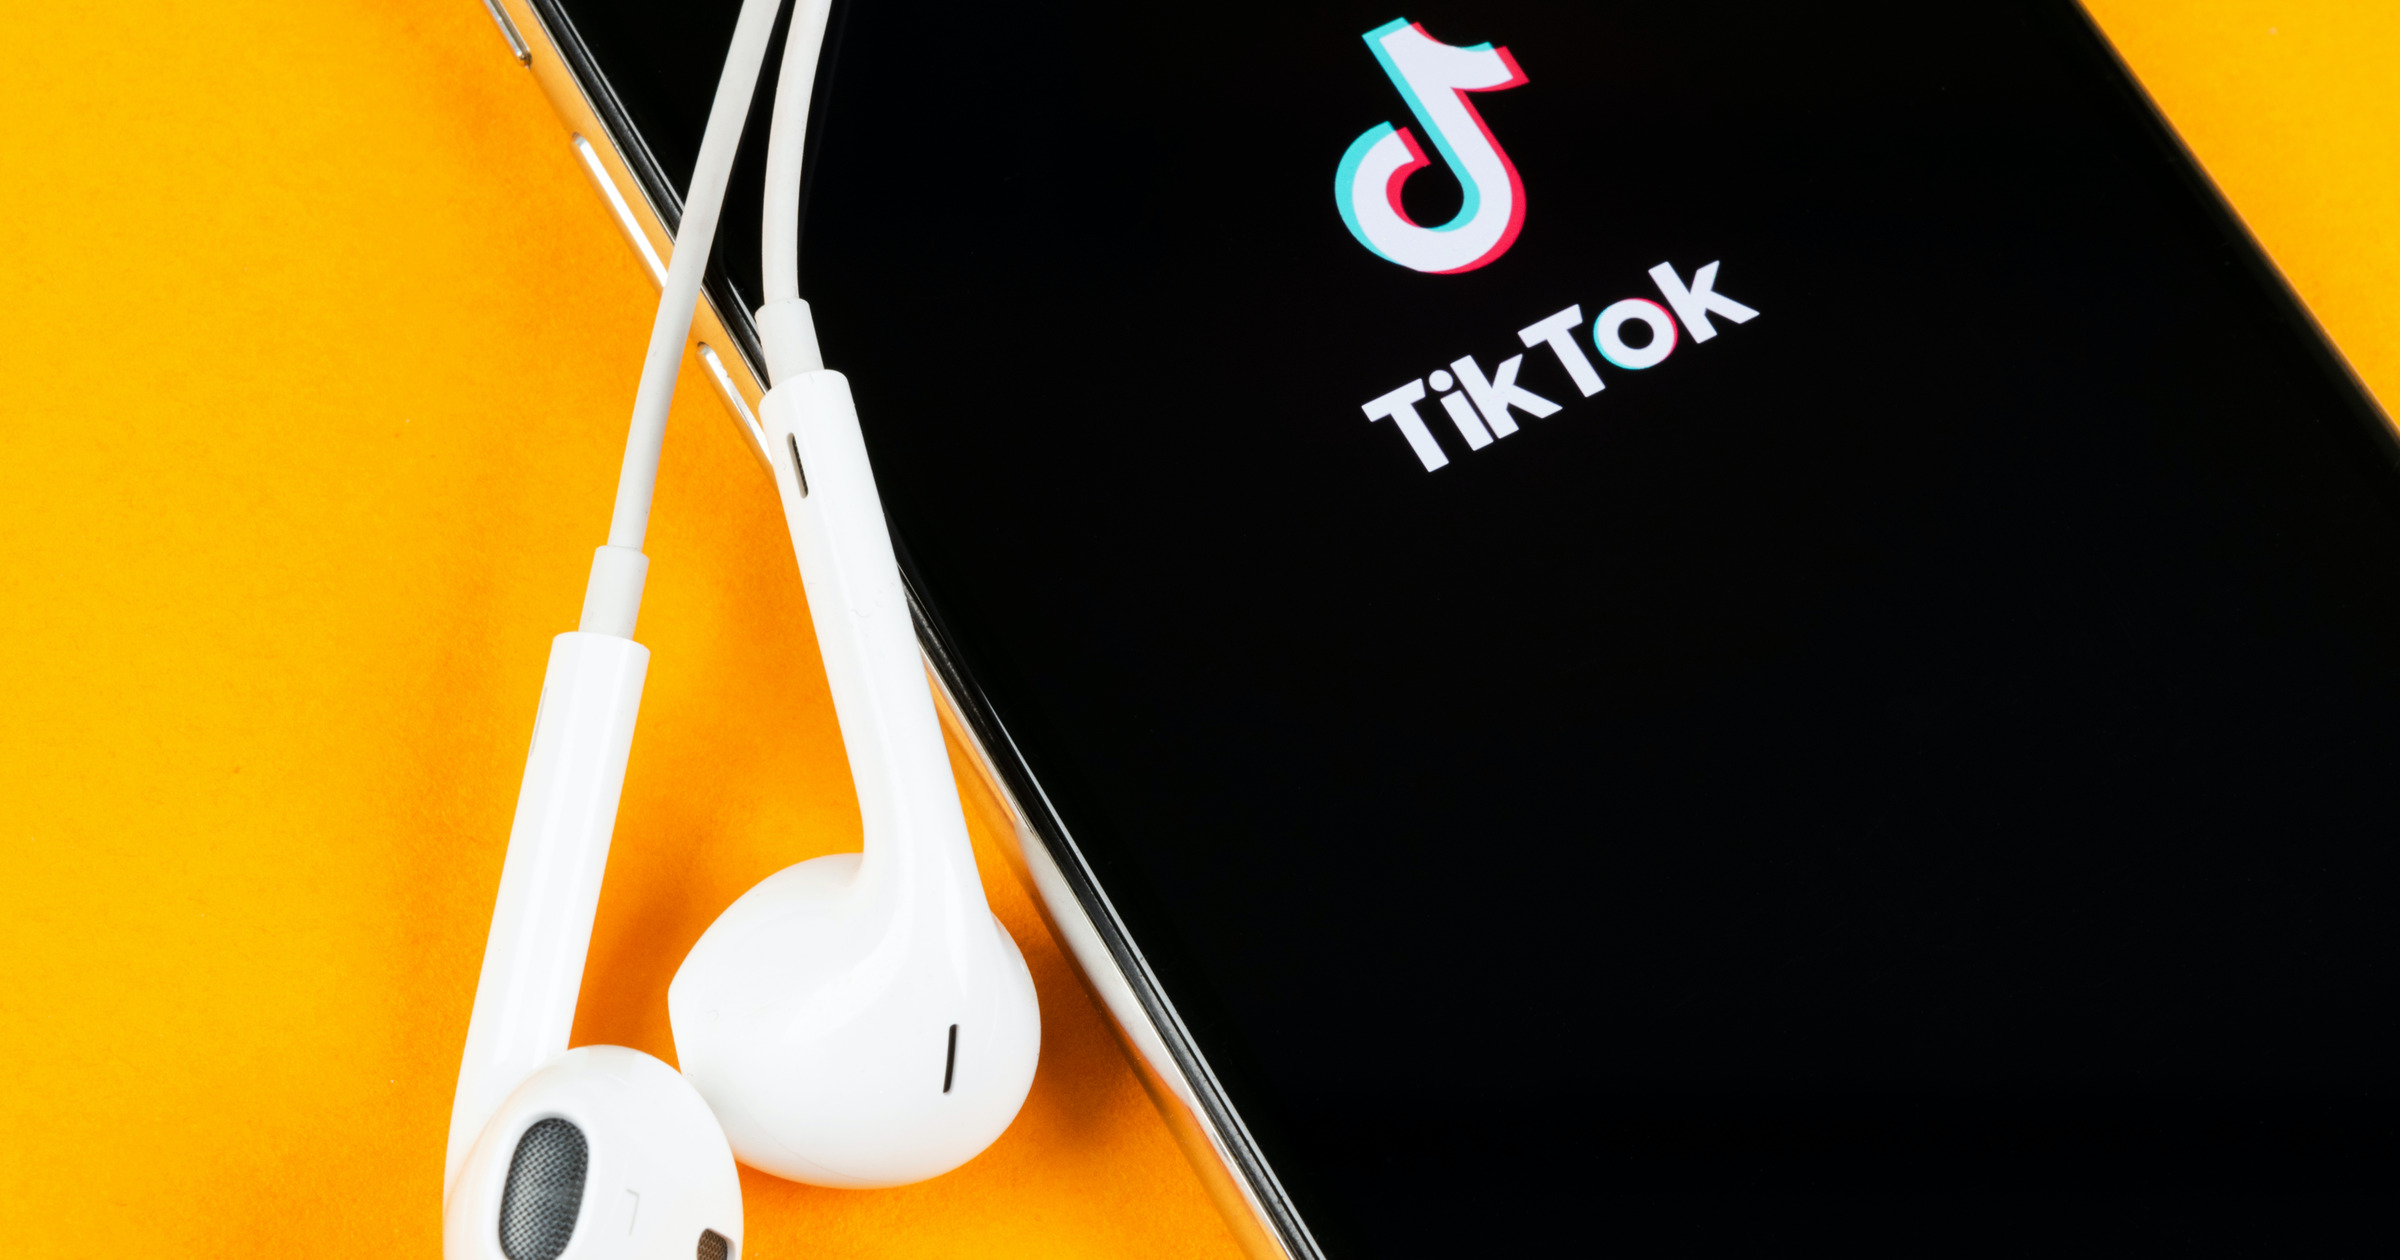 iPhone with TikTok logo and EarPods